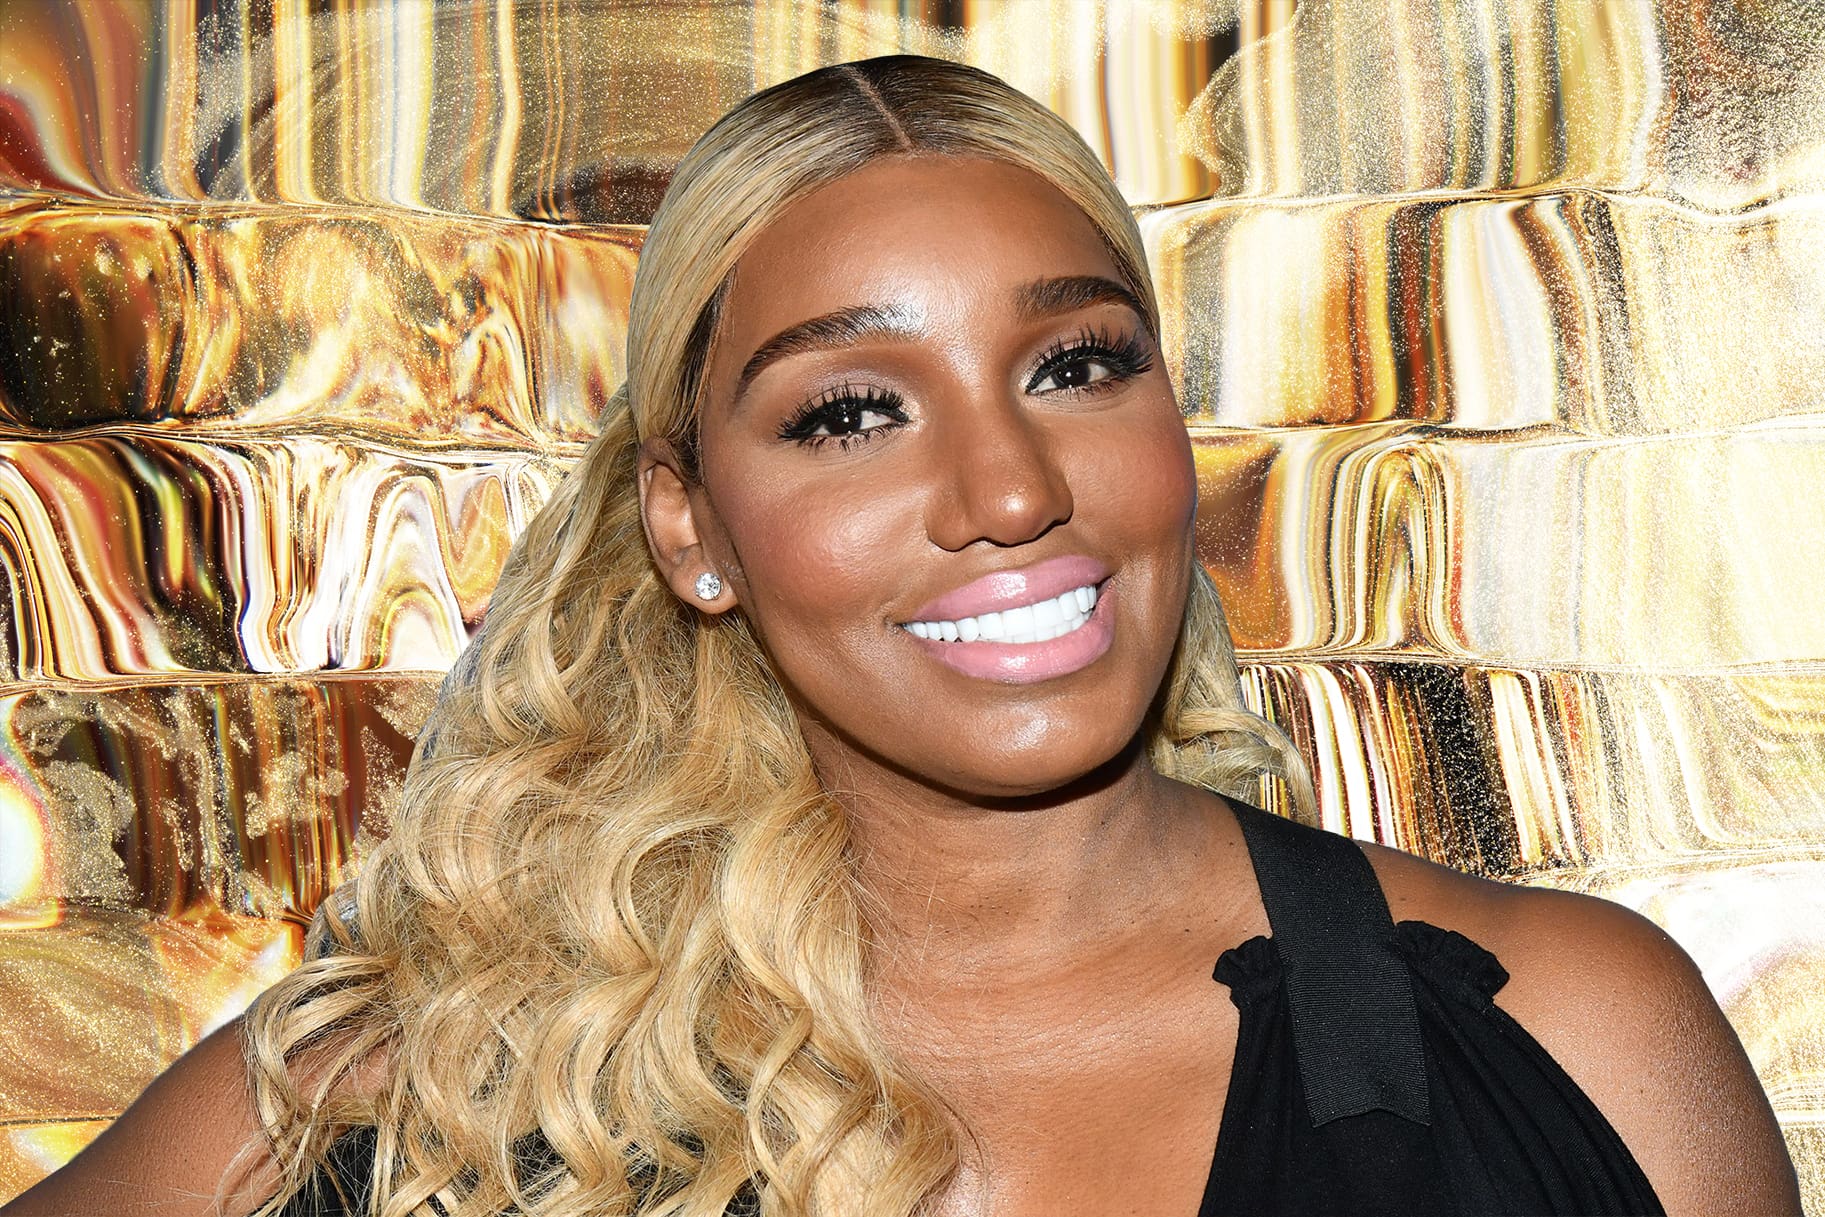 ”nene-leakes-is-proud-to-be-a-self-made-successful-entrepreneurial-women”